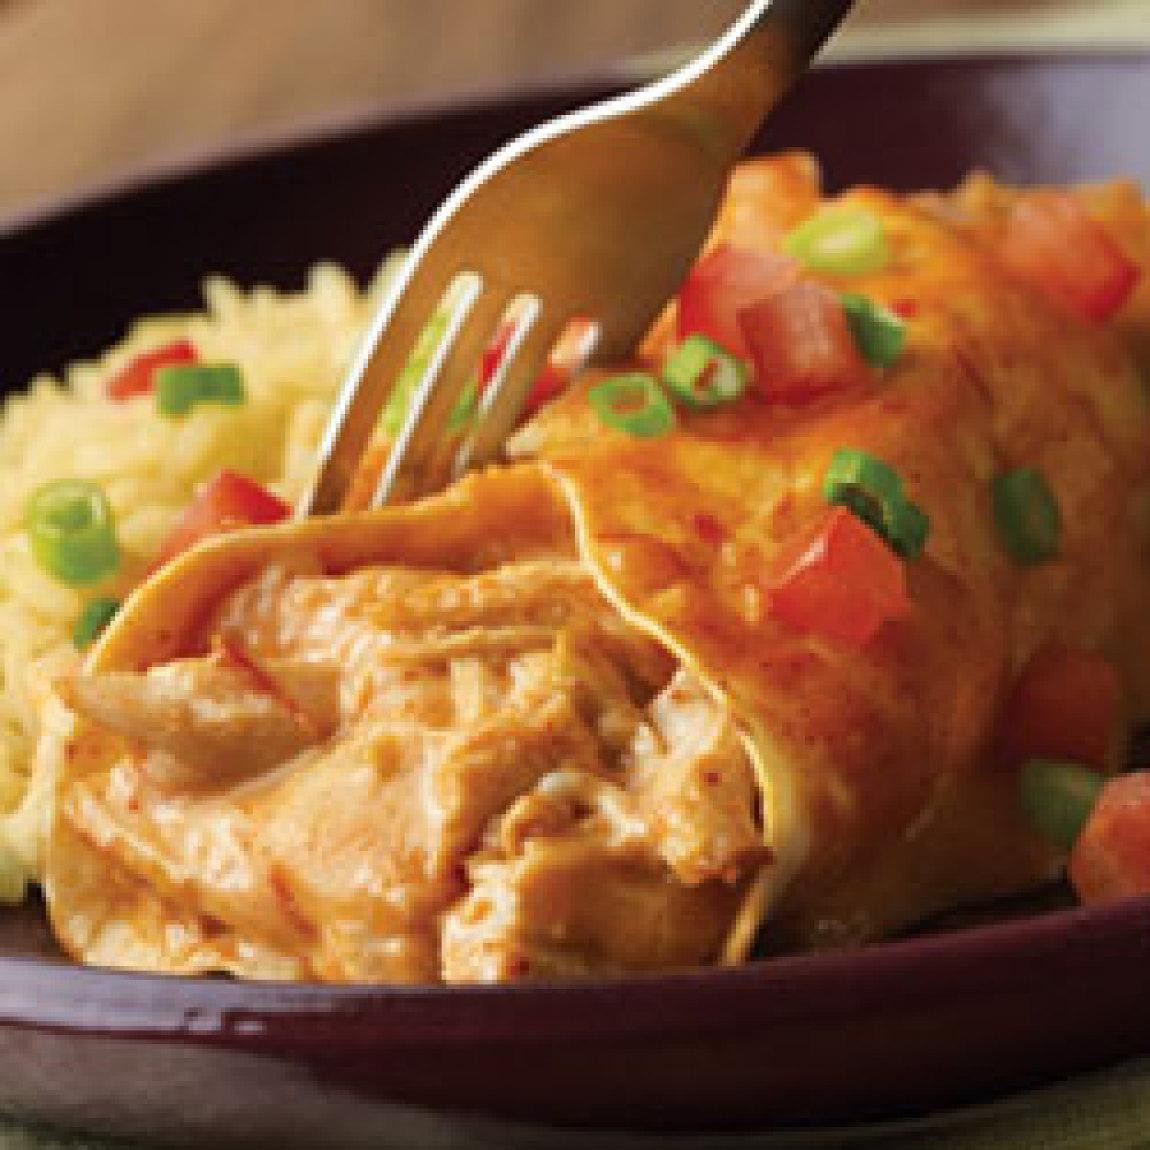 Campbells Soup Chicken Enchilada Recipes
 Campbell s Easy Chicken and Cheese Enchiladas Recipe